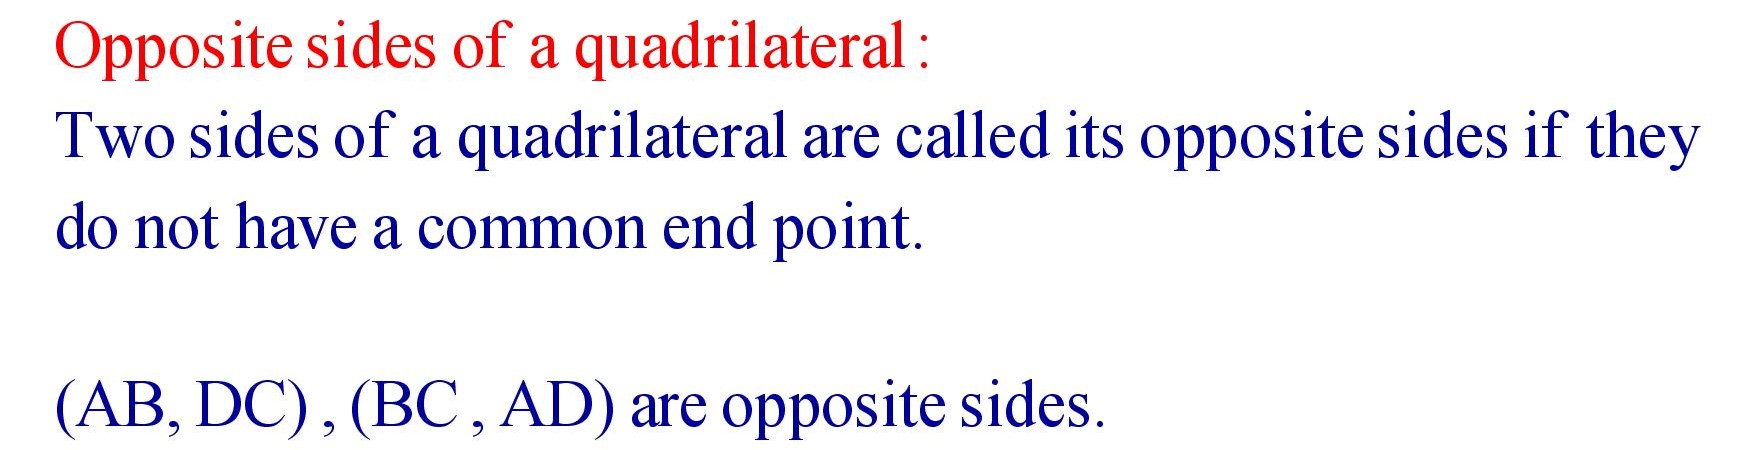 Opposite side of a quadrilateral